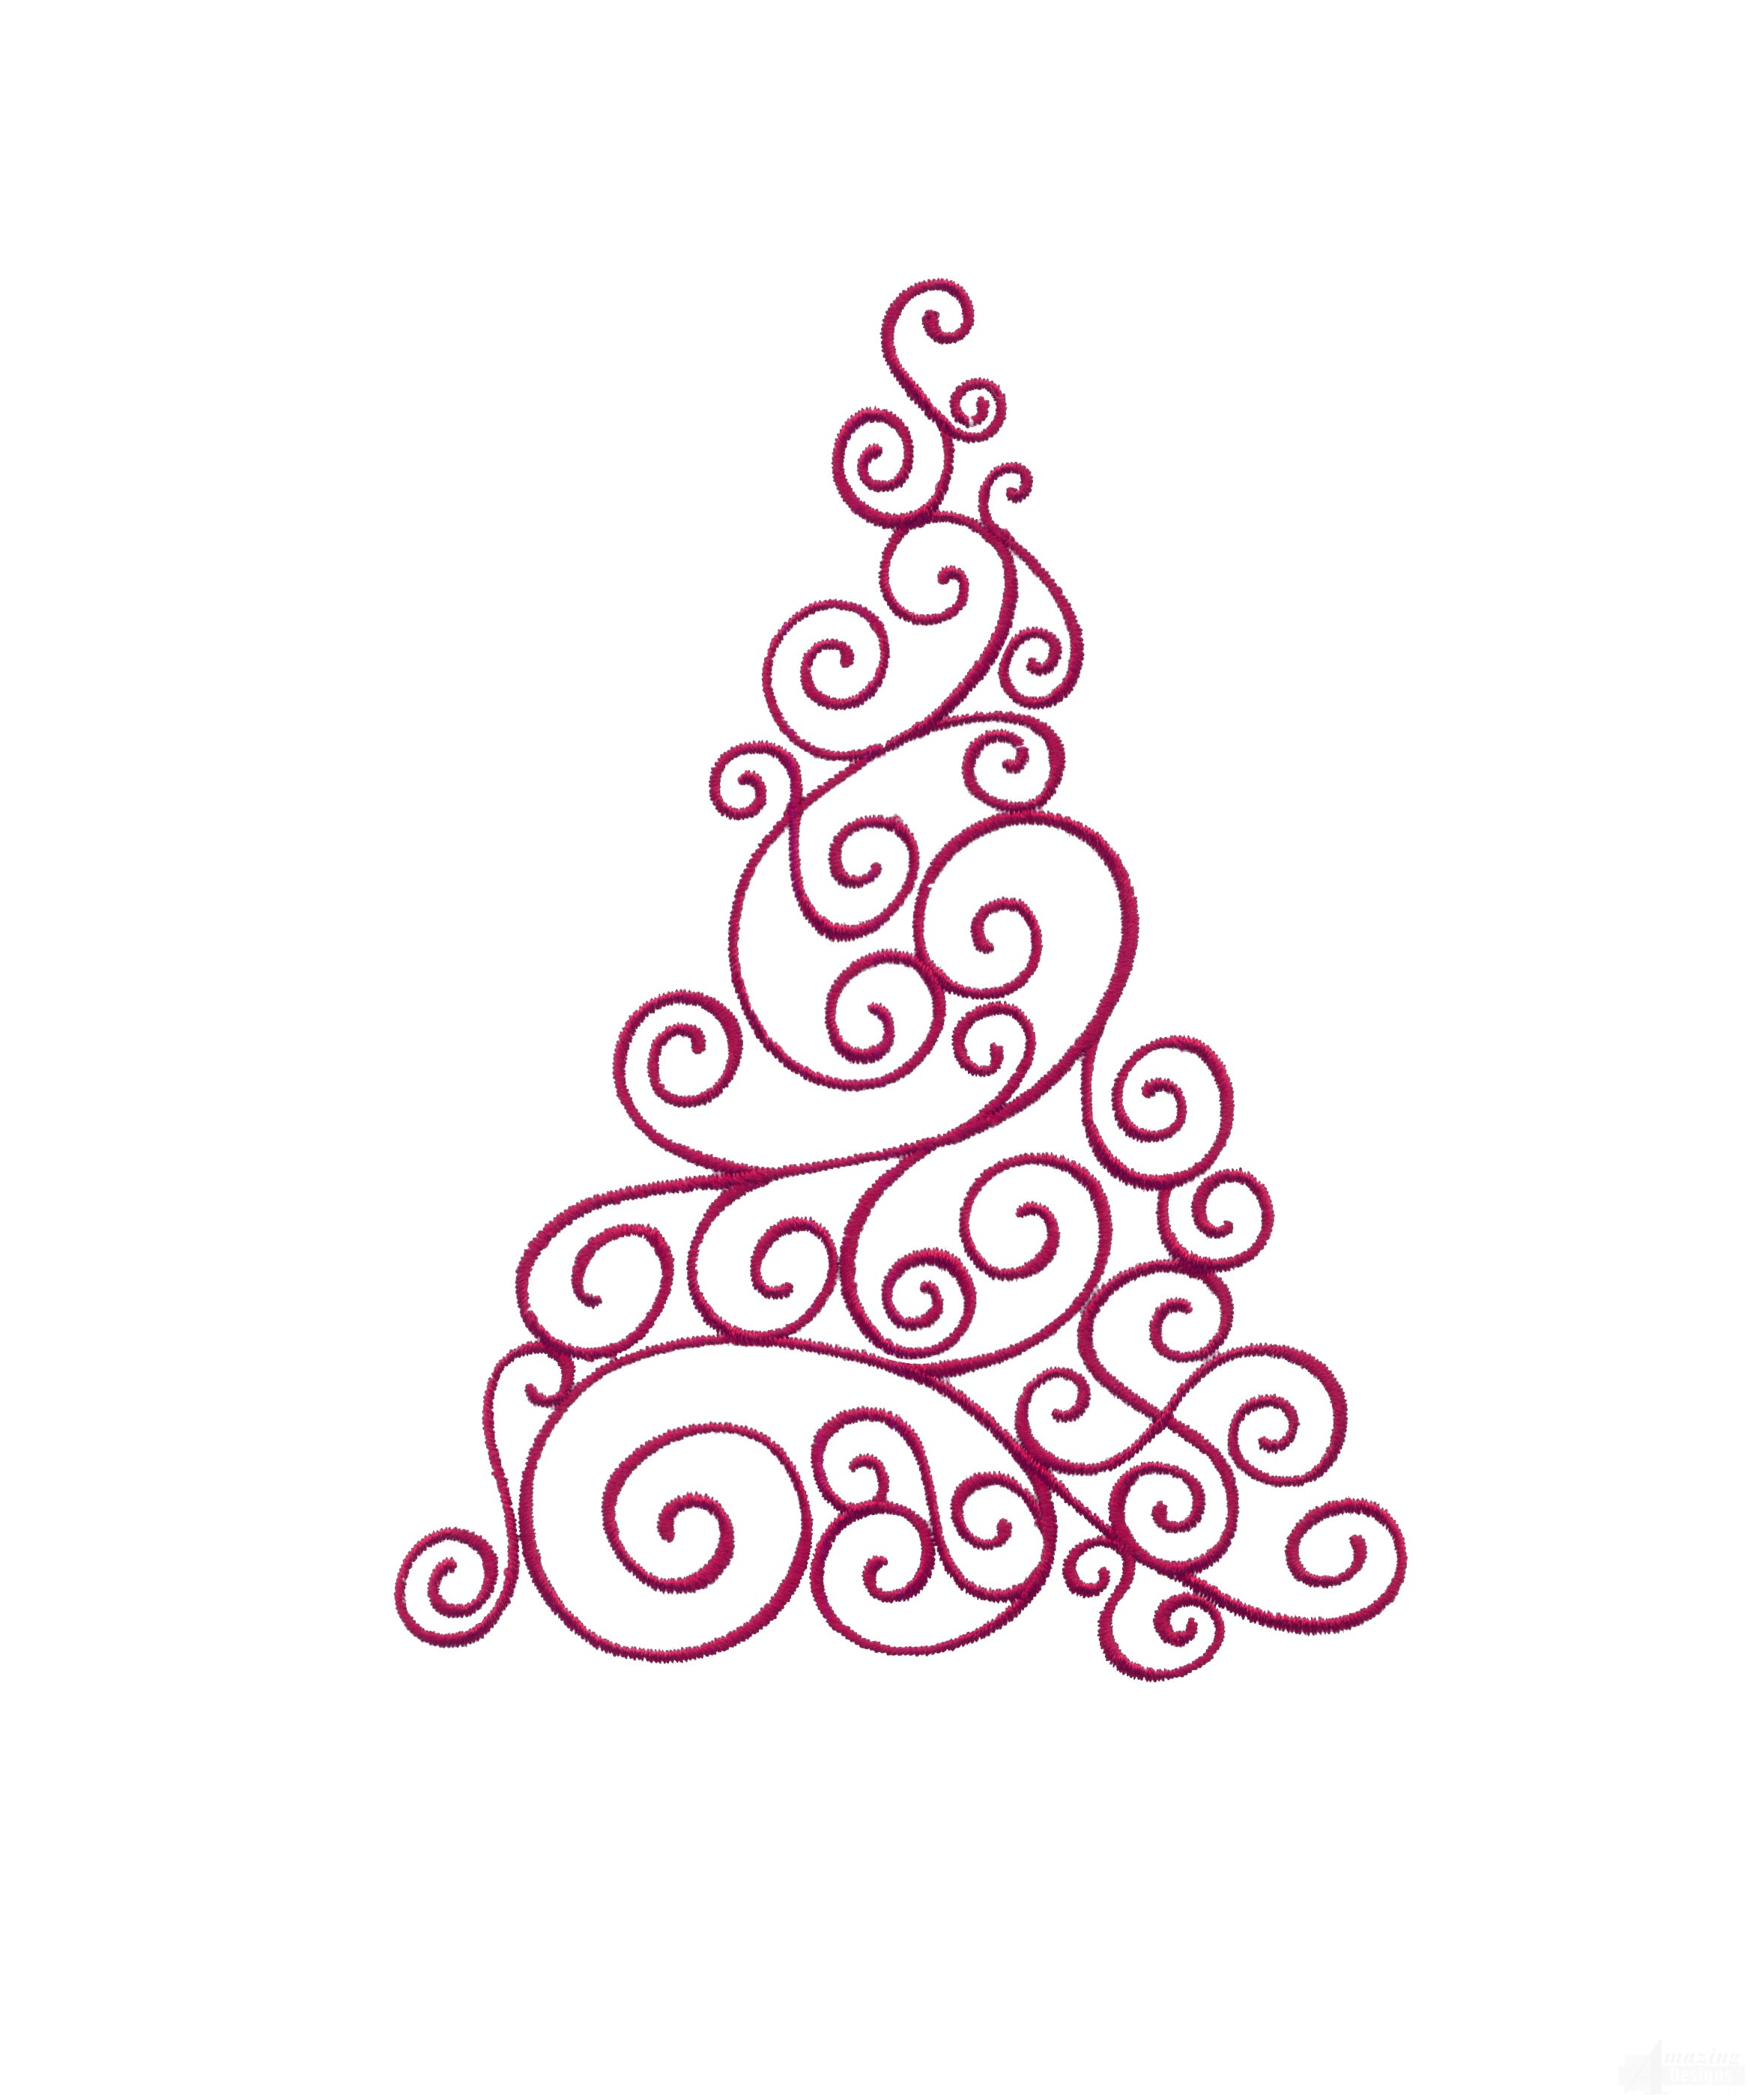 Christmas Tree Line Drawing - Cliparts.co